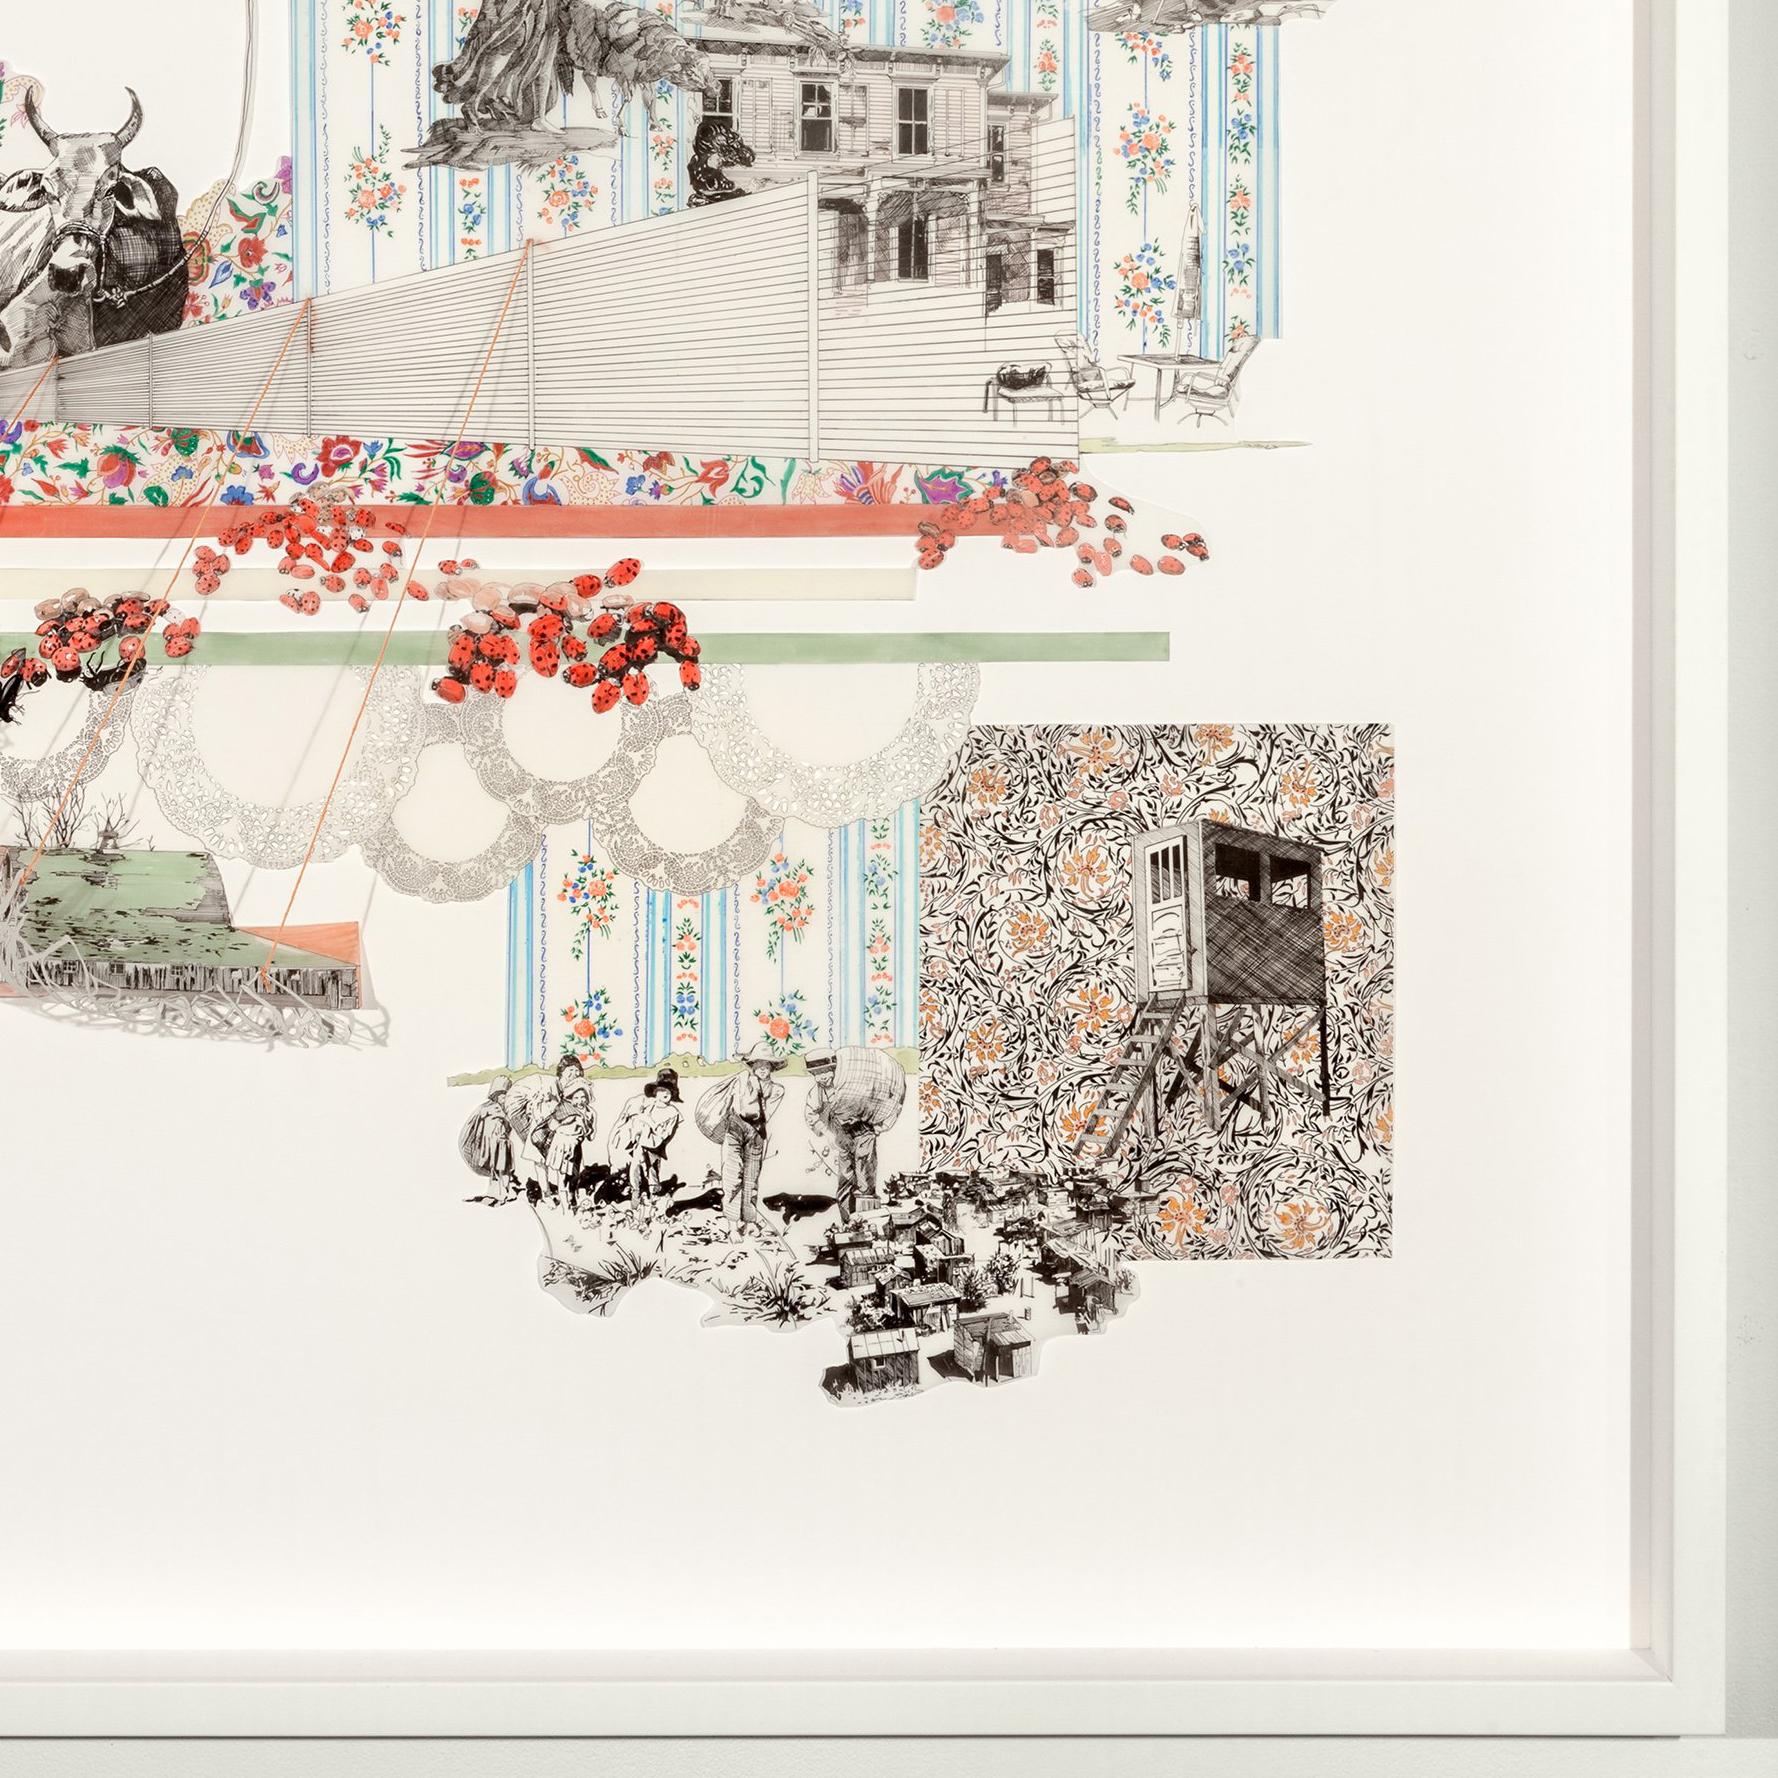 medium: ink drawing and thread on hand-cut mylar


Laura Tanner Graham's drawings and installations are often discussed as part of the Southern Gothic literary tradition, sharing similar themes with authors such as Flannery O’Connor and Eudora